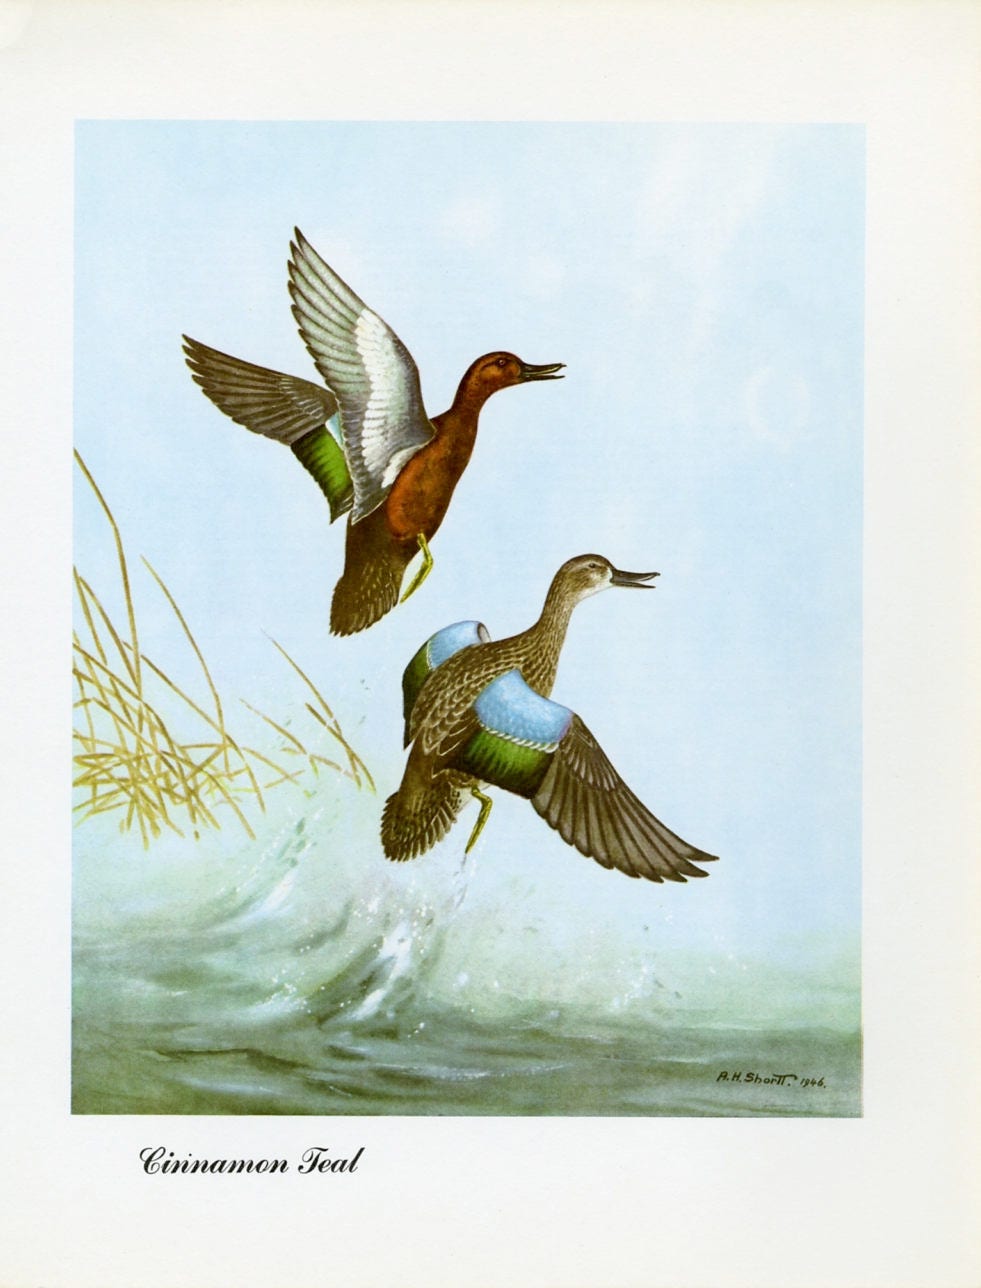 1948 Cinnamon Teal Original Waterfowl Print - Vintage Angus H. Shortt Illustration - Ornithology Print - Know Your Ducks and Geese